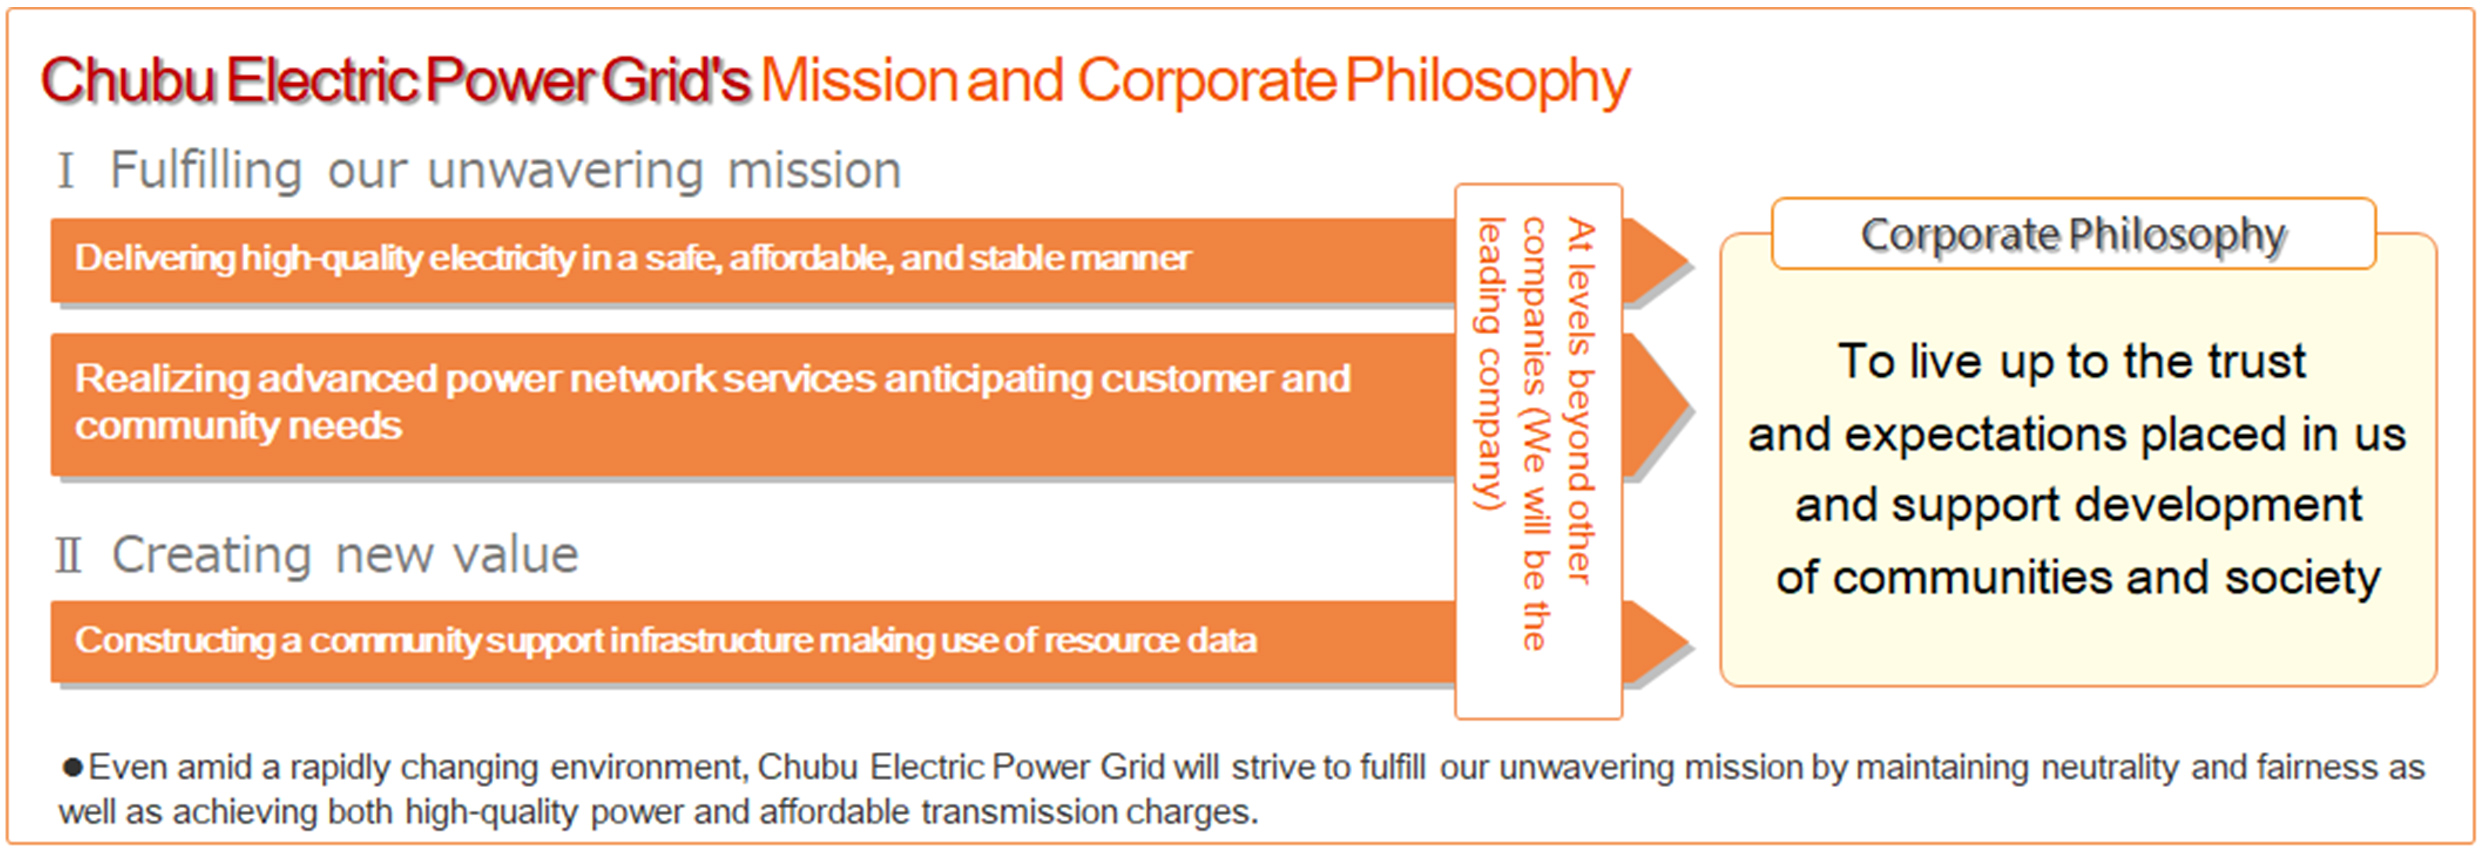 Chubu Electric Power Grid's Mission and Corporate Philosophy